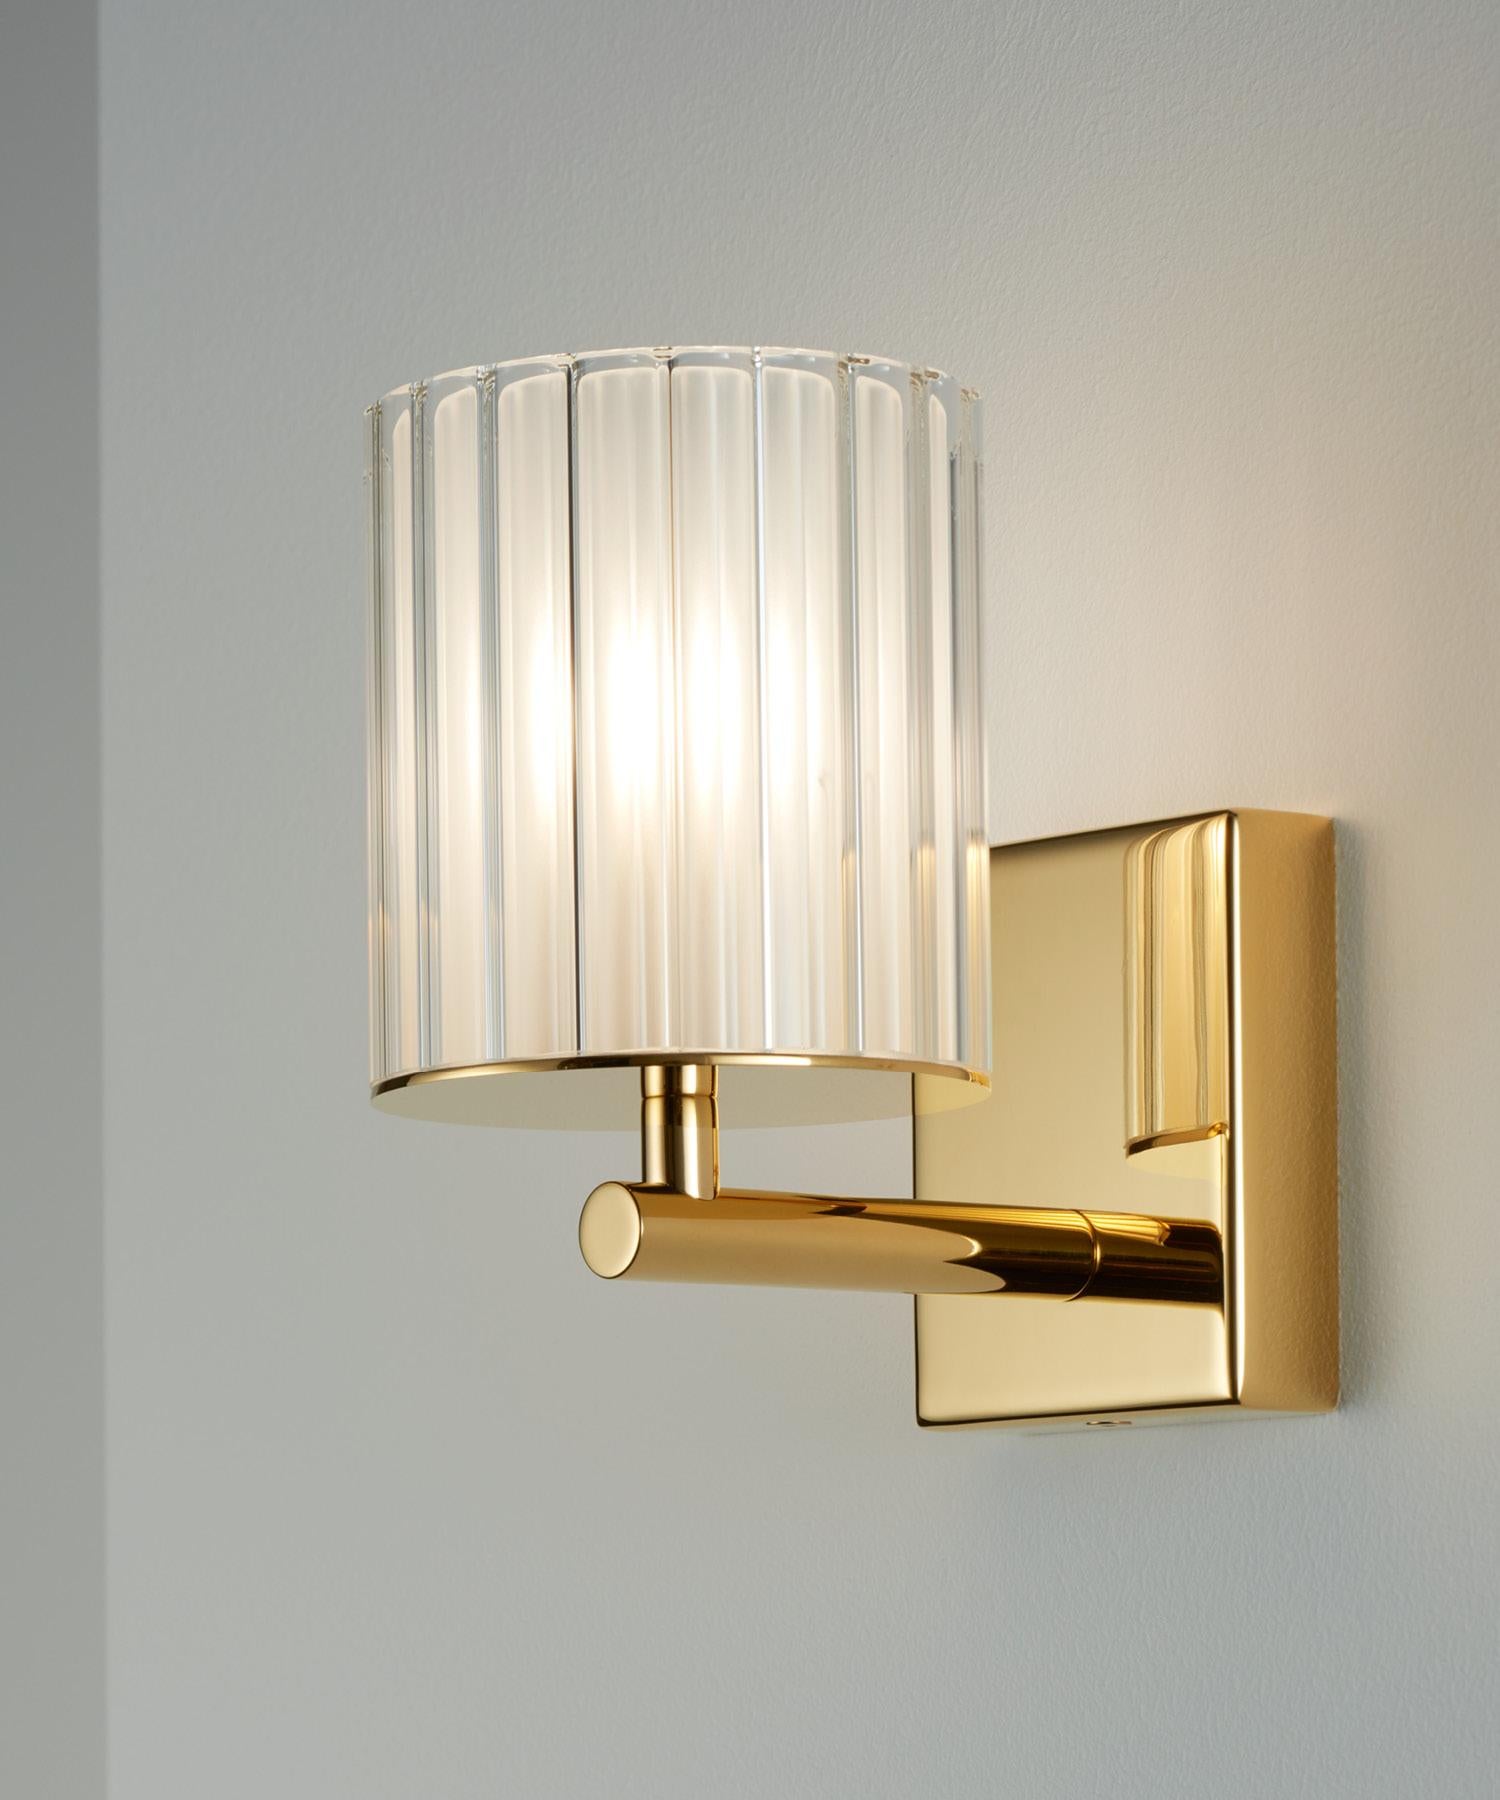 British Flute Wall Light in Polished Chrome with Frosted Glass Diffuser, UL Listed For Sale